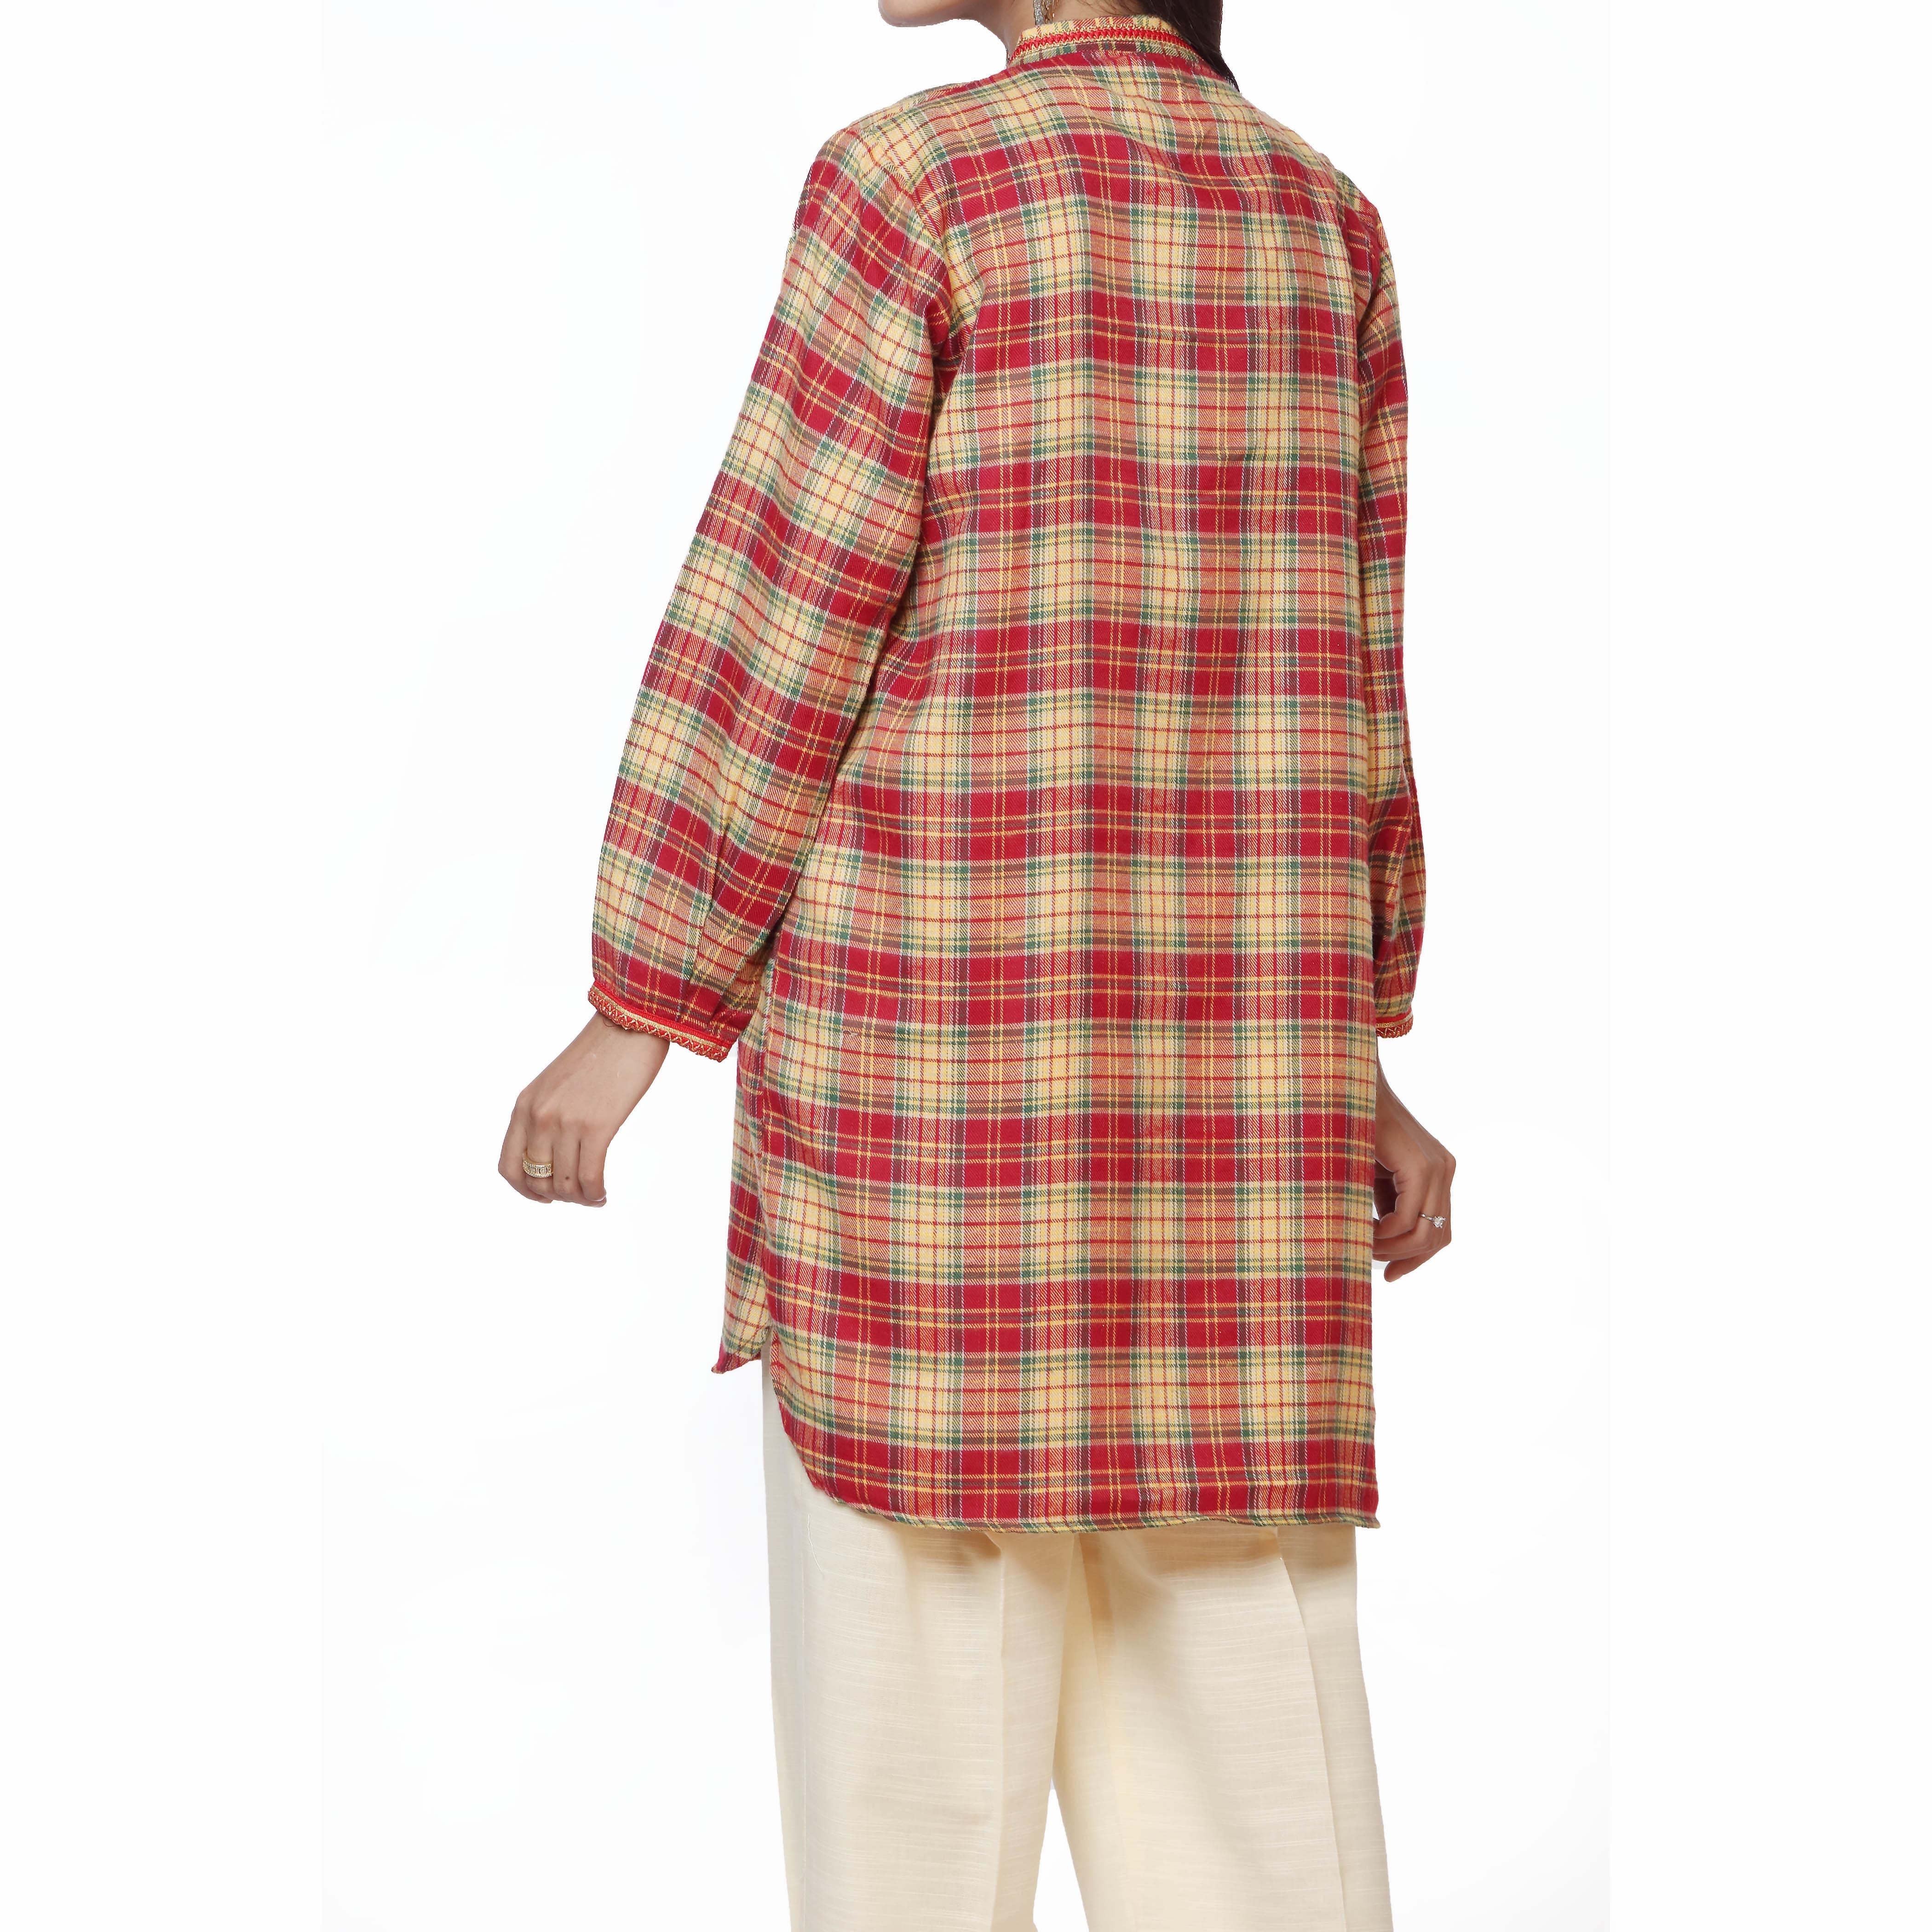 1PC-Flannel Checkered Shirt  PW2182